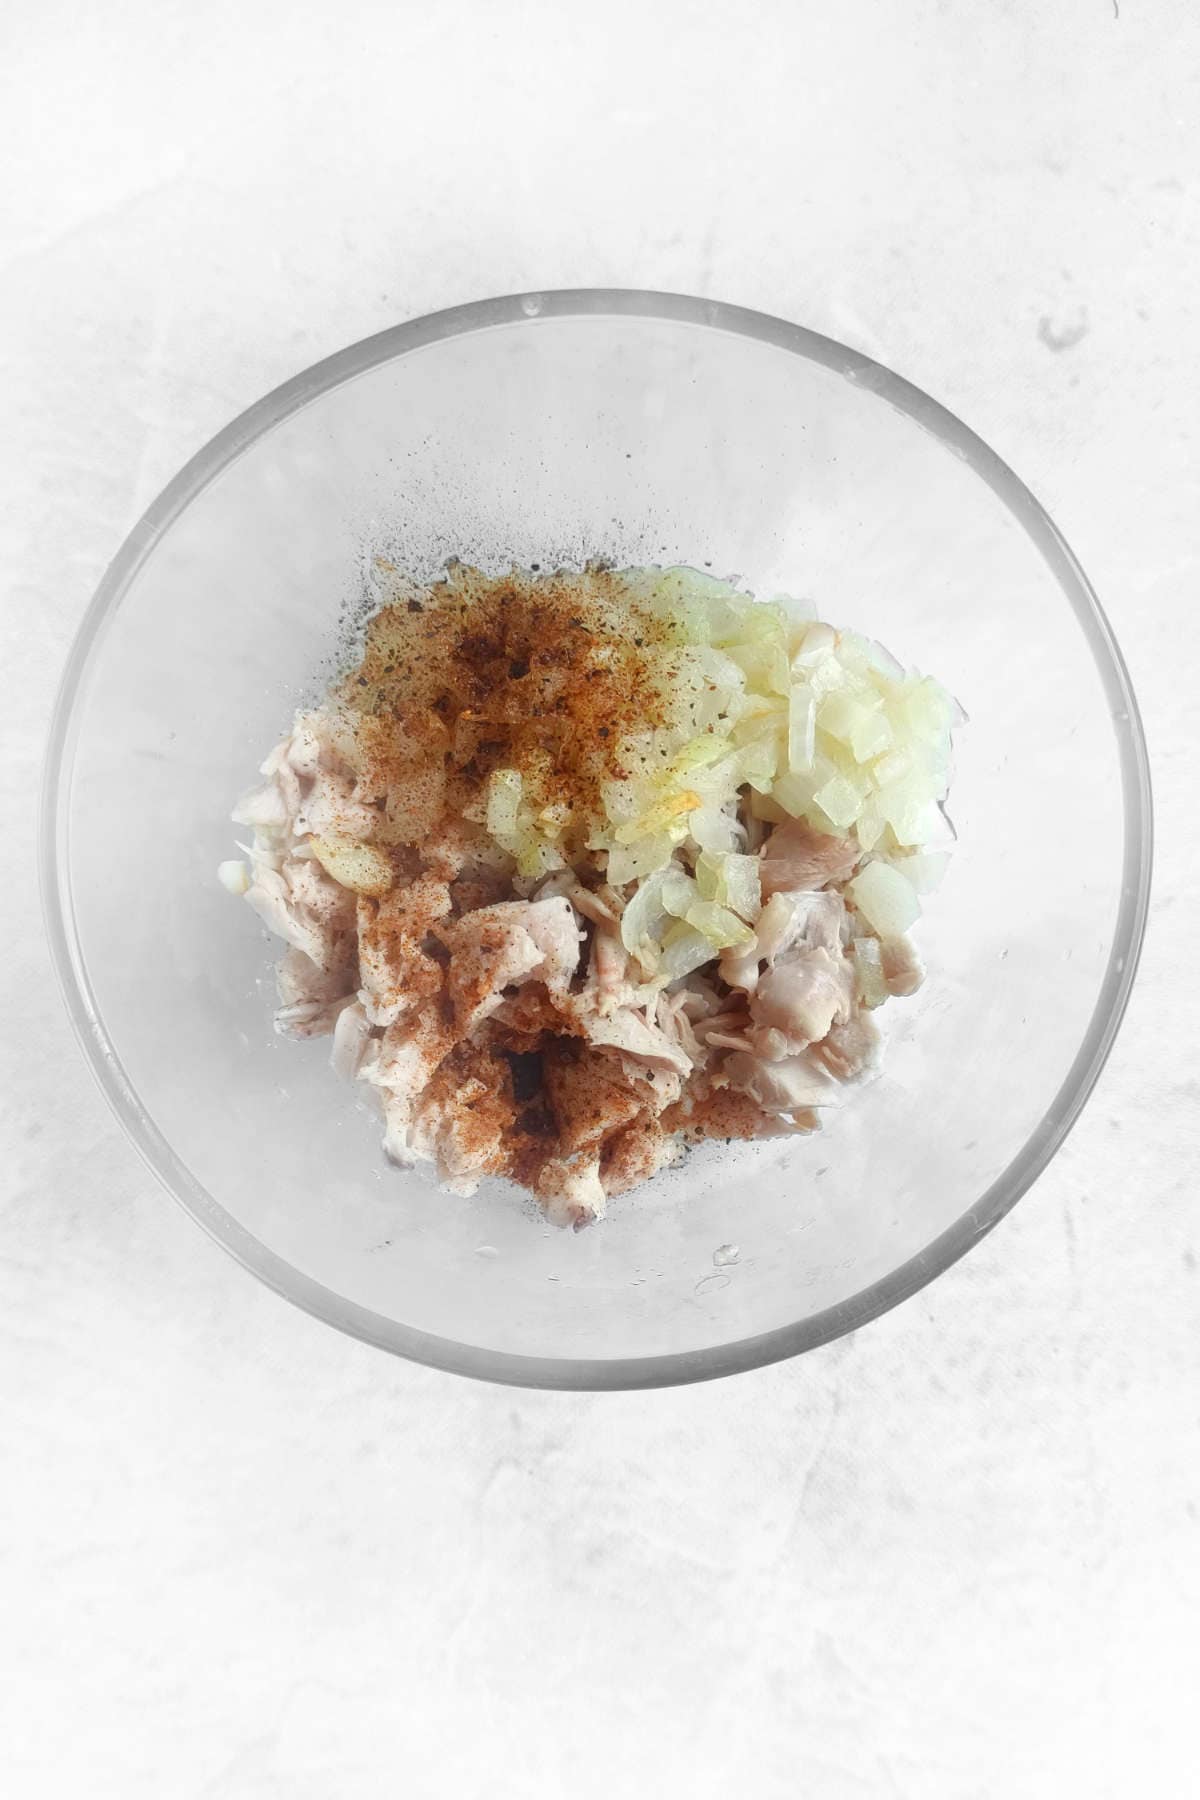 minced meat, onion, and seasonings in a bowl.